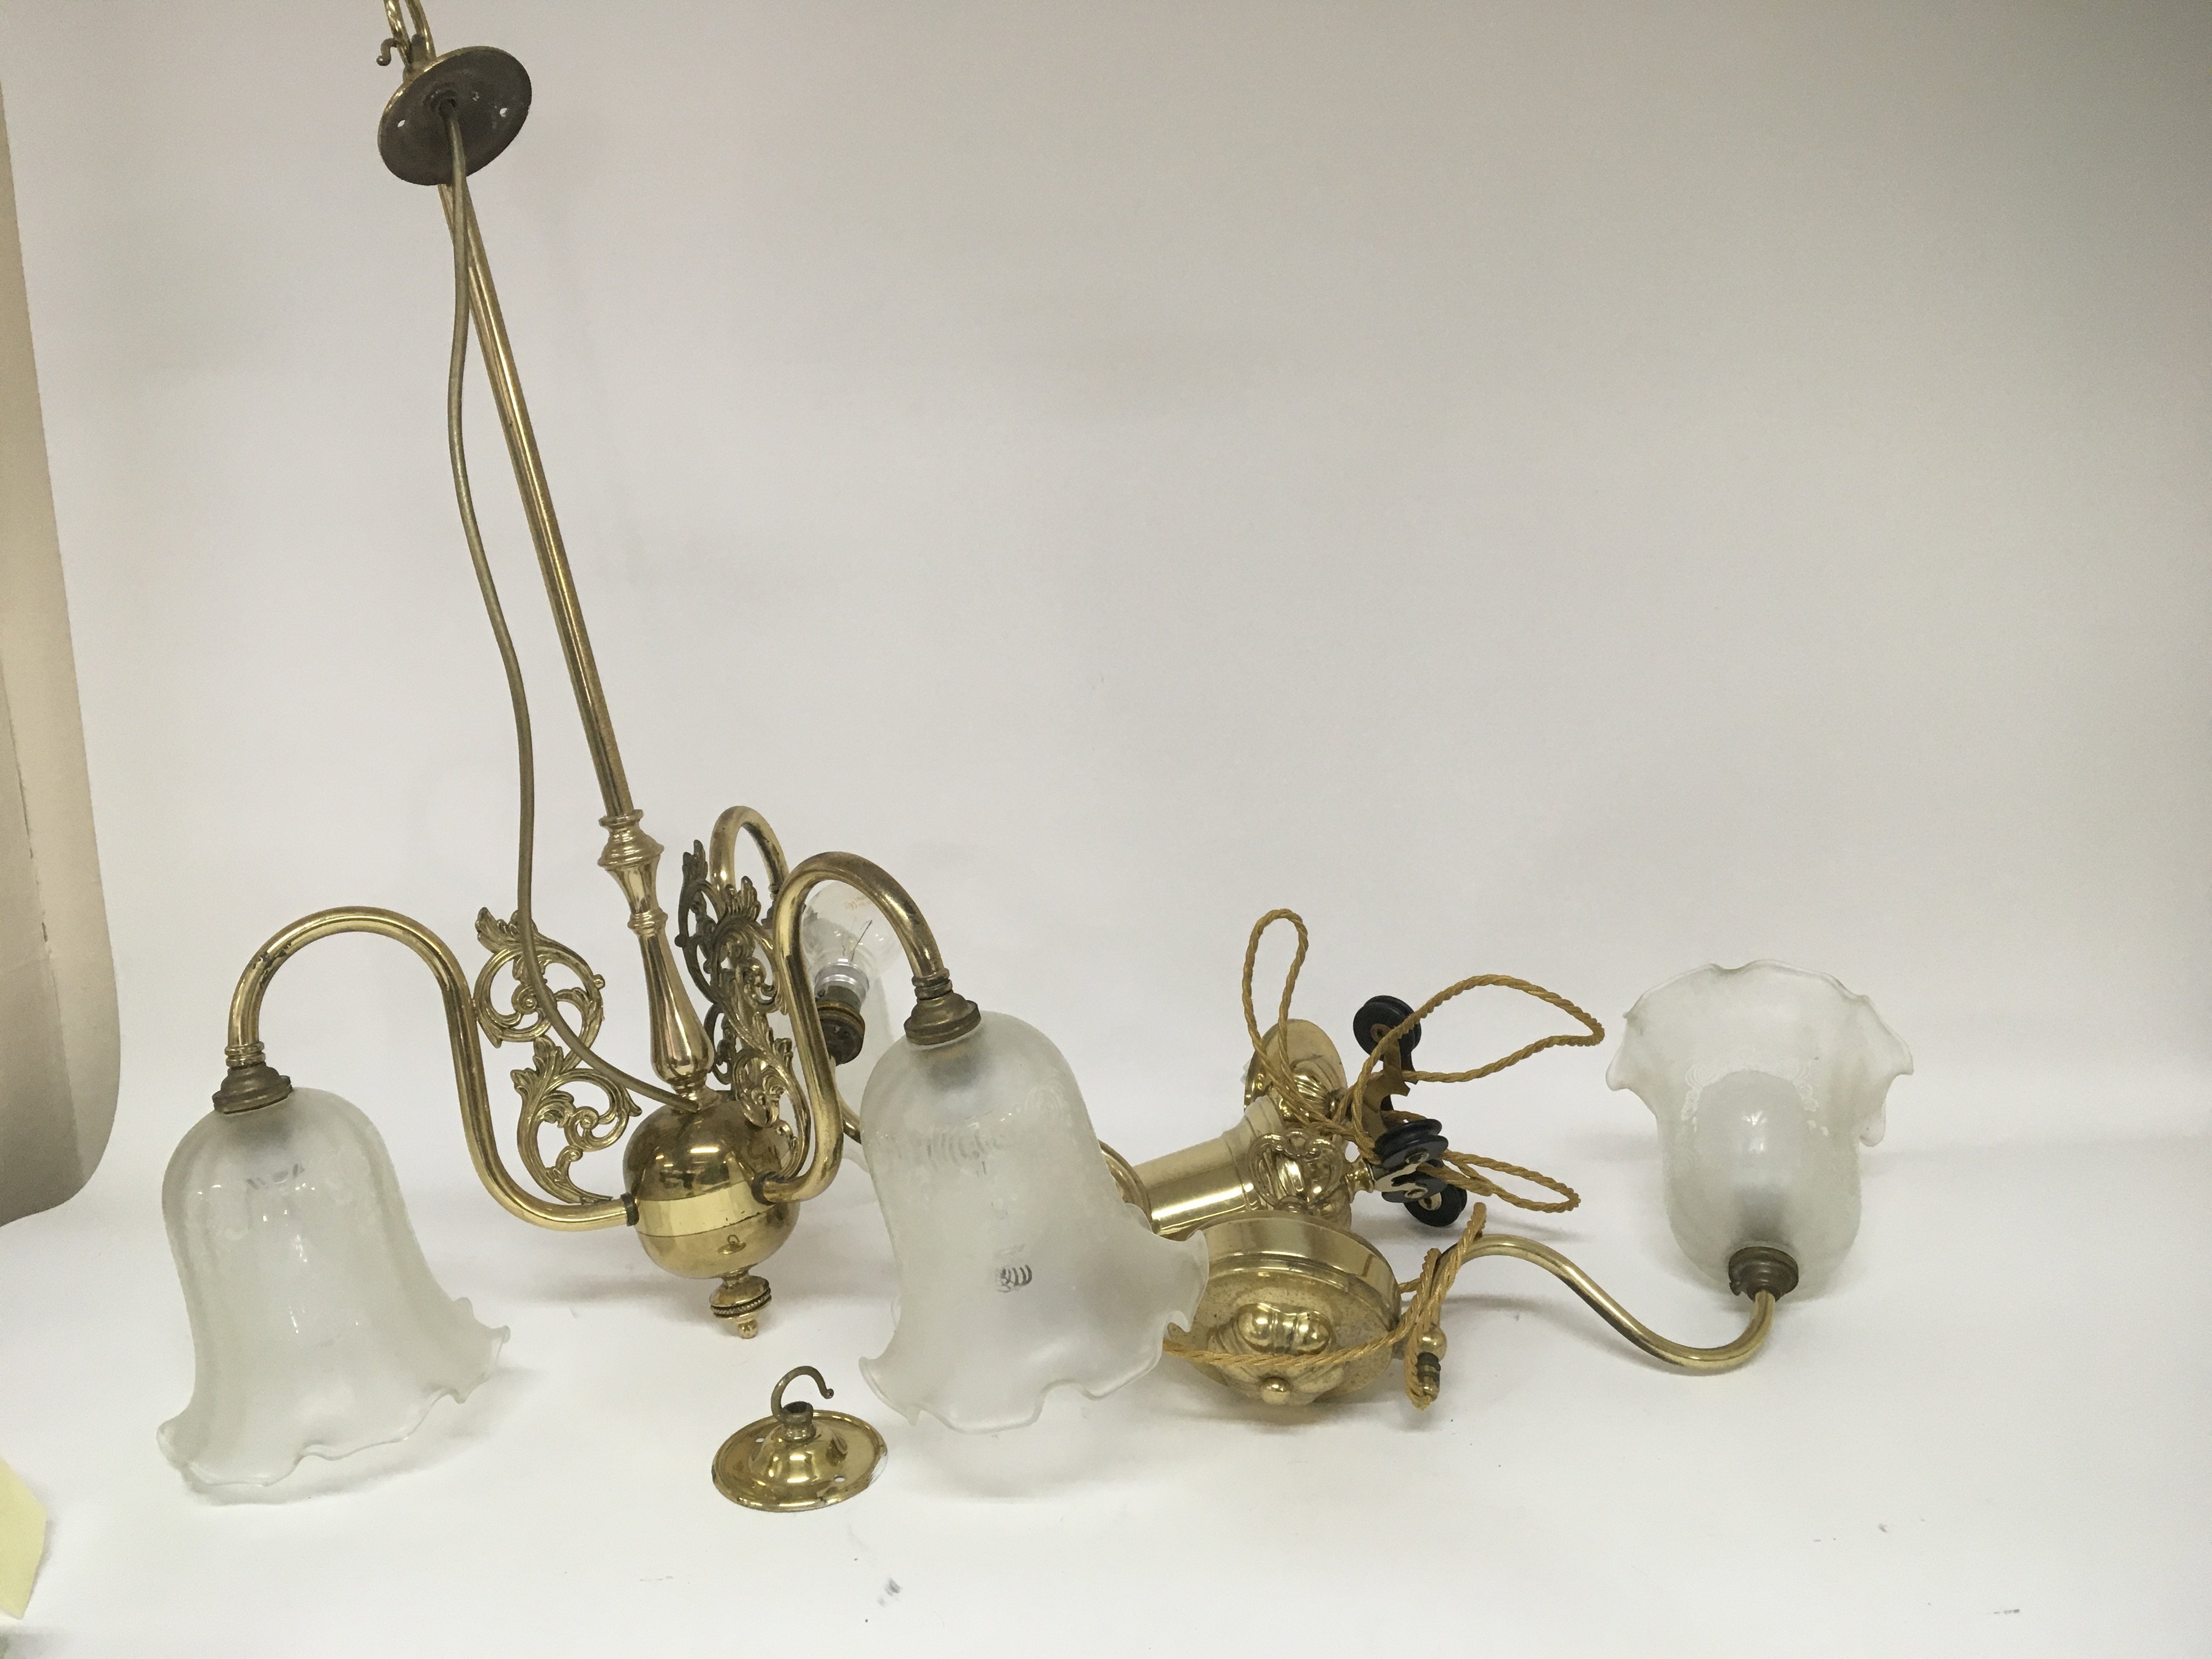 Two brass light fittings with acid etched glass sh